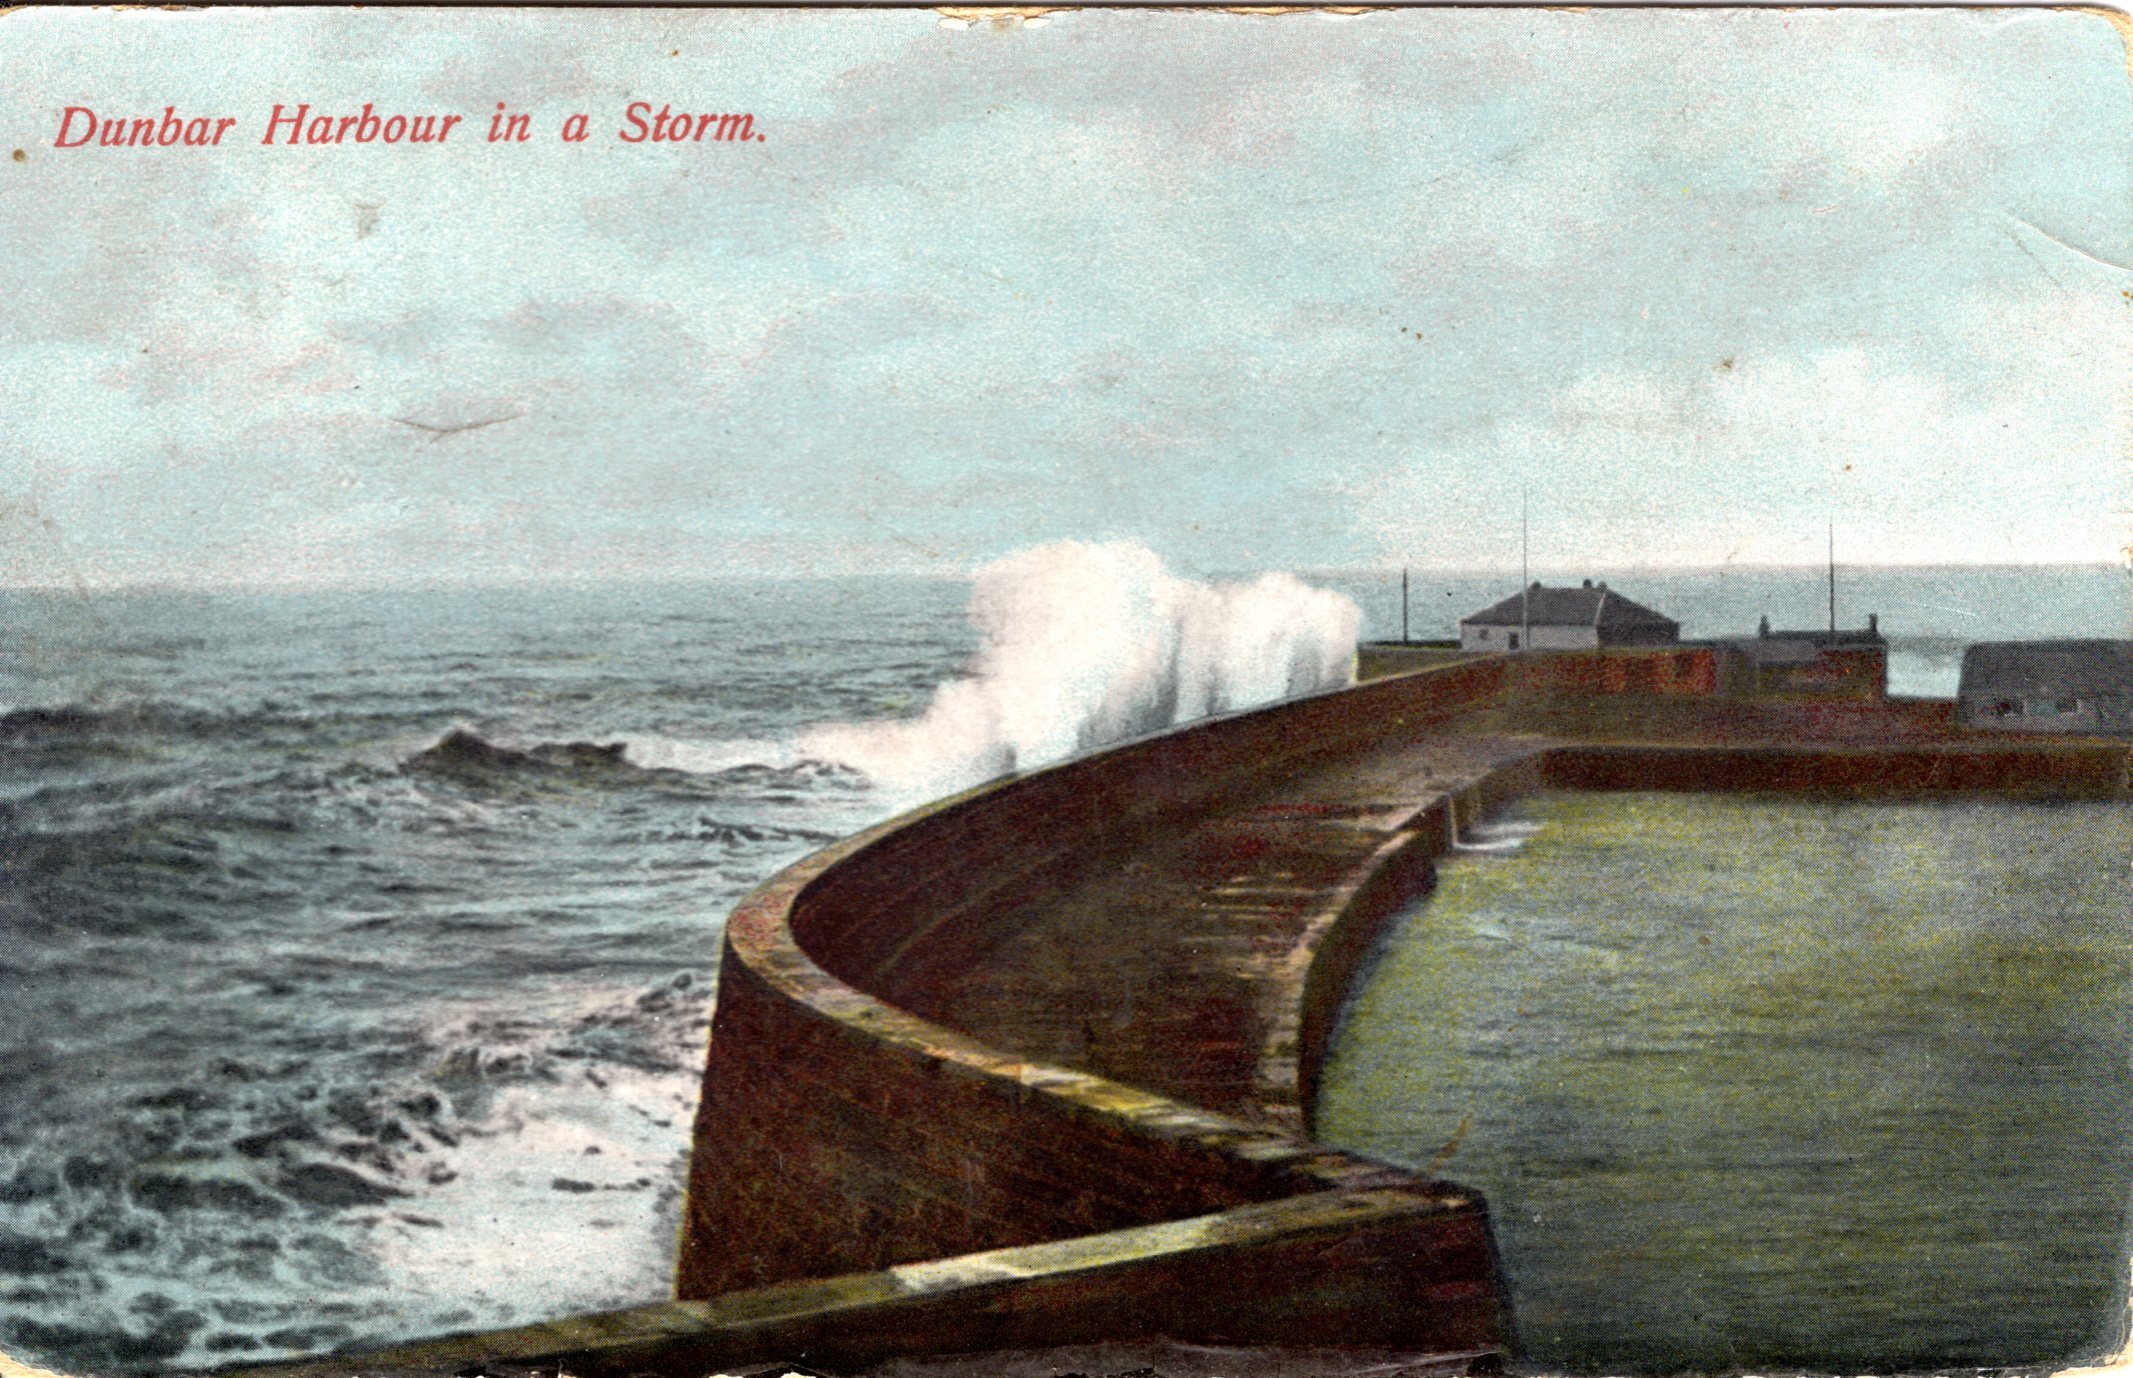 Dunbar harbour in a storm, a postcard stamped and posted in 1907